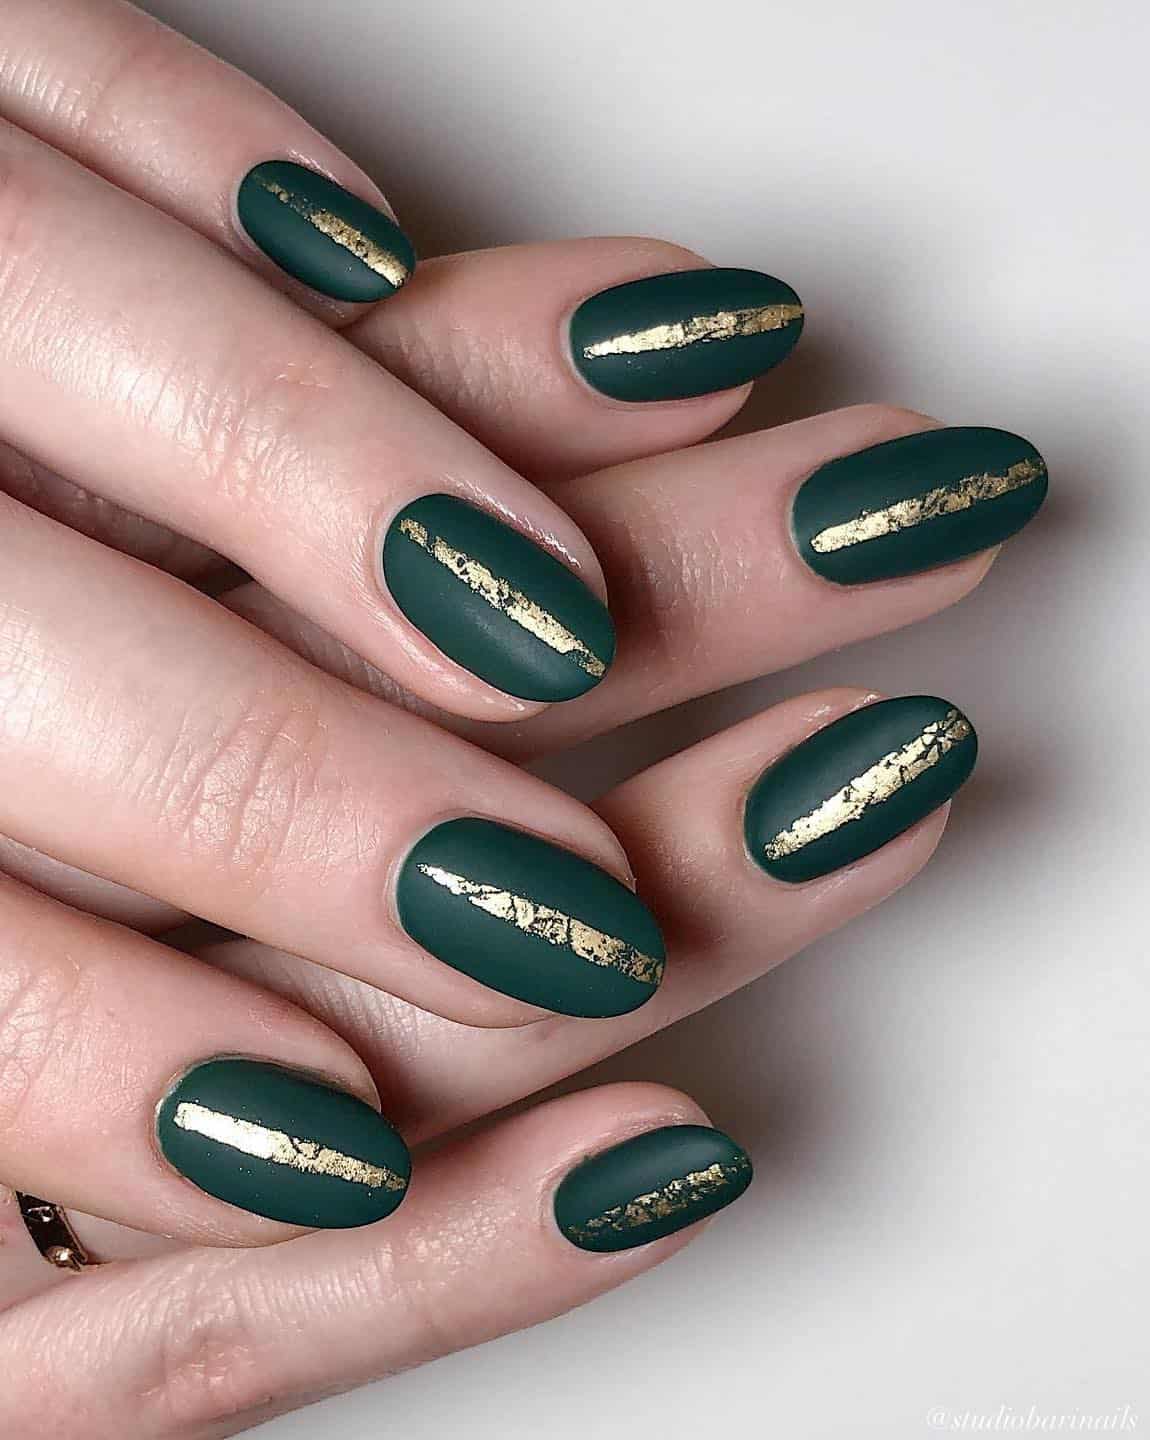 A hand with short round nails painted a matte forest green with vertical gold bands on each nail